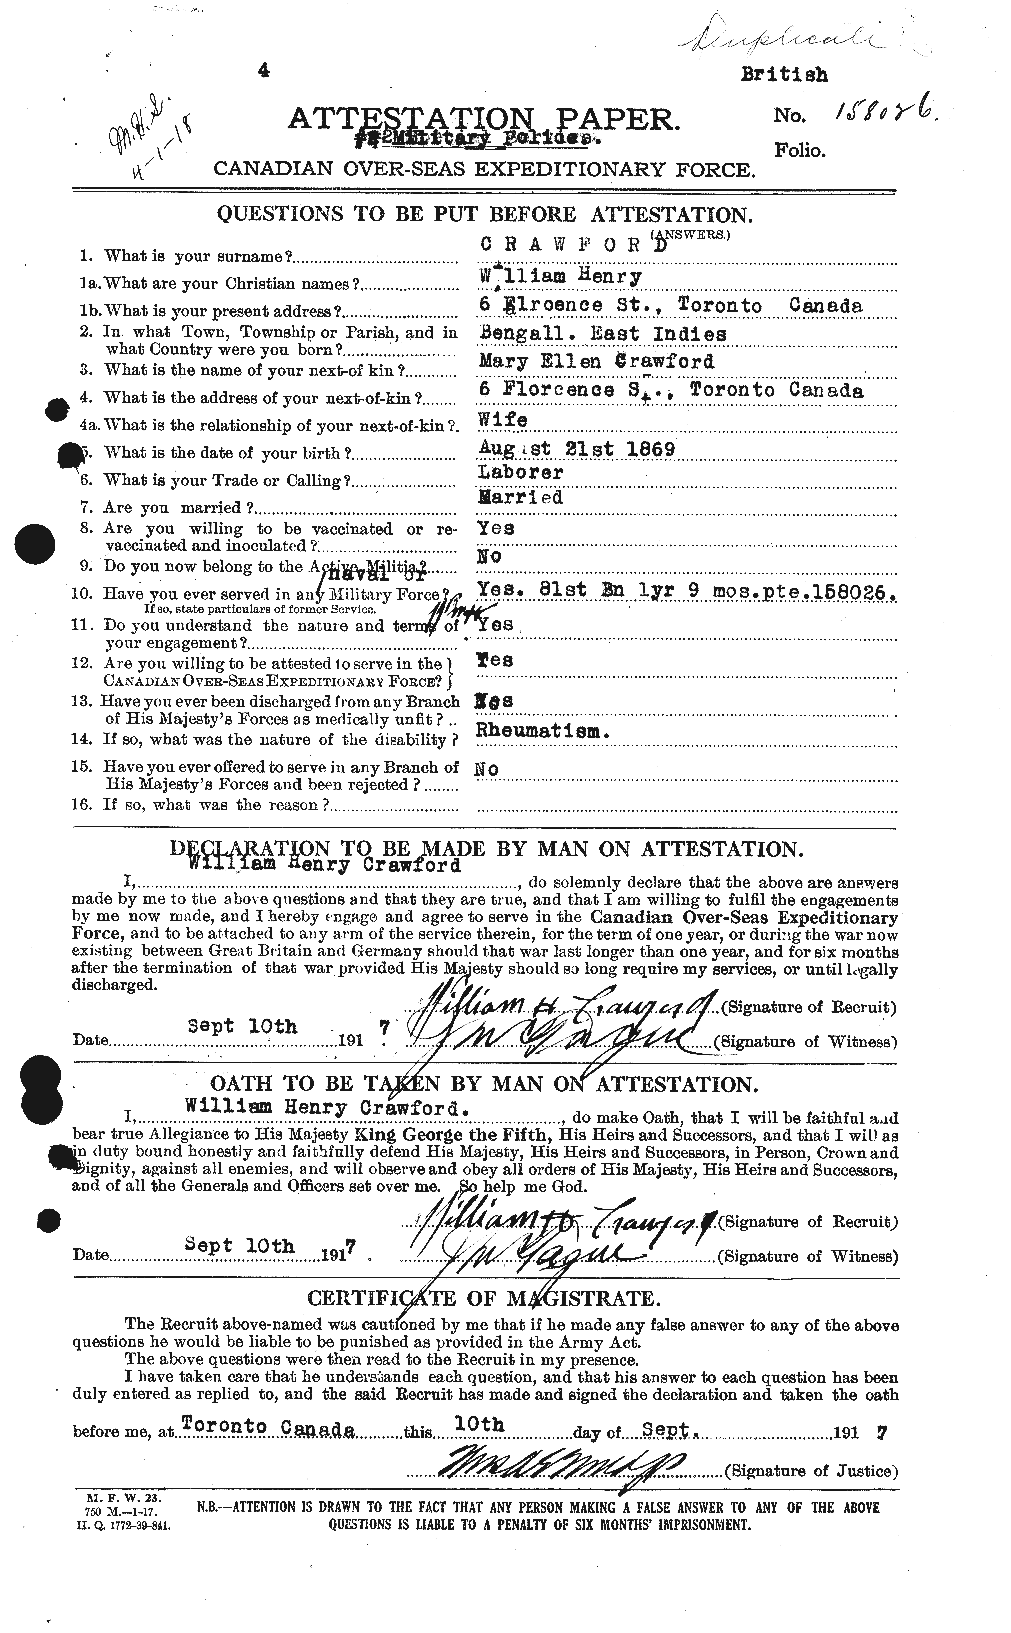 Personnel Records of the First World War - CEF 061139a